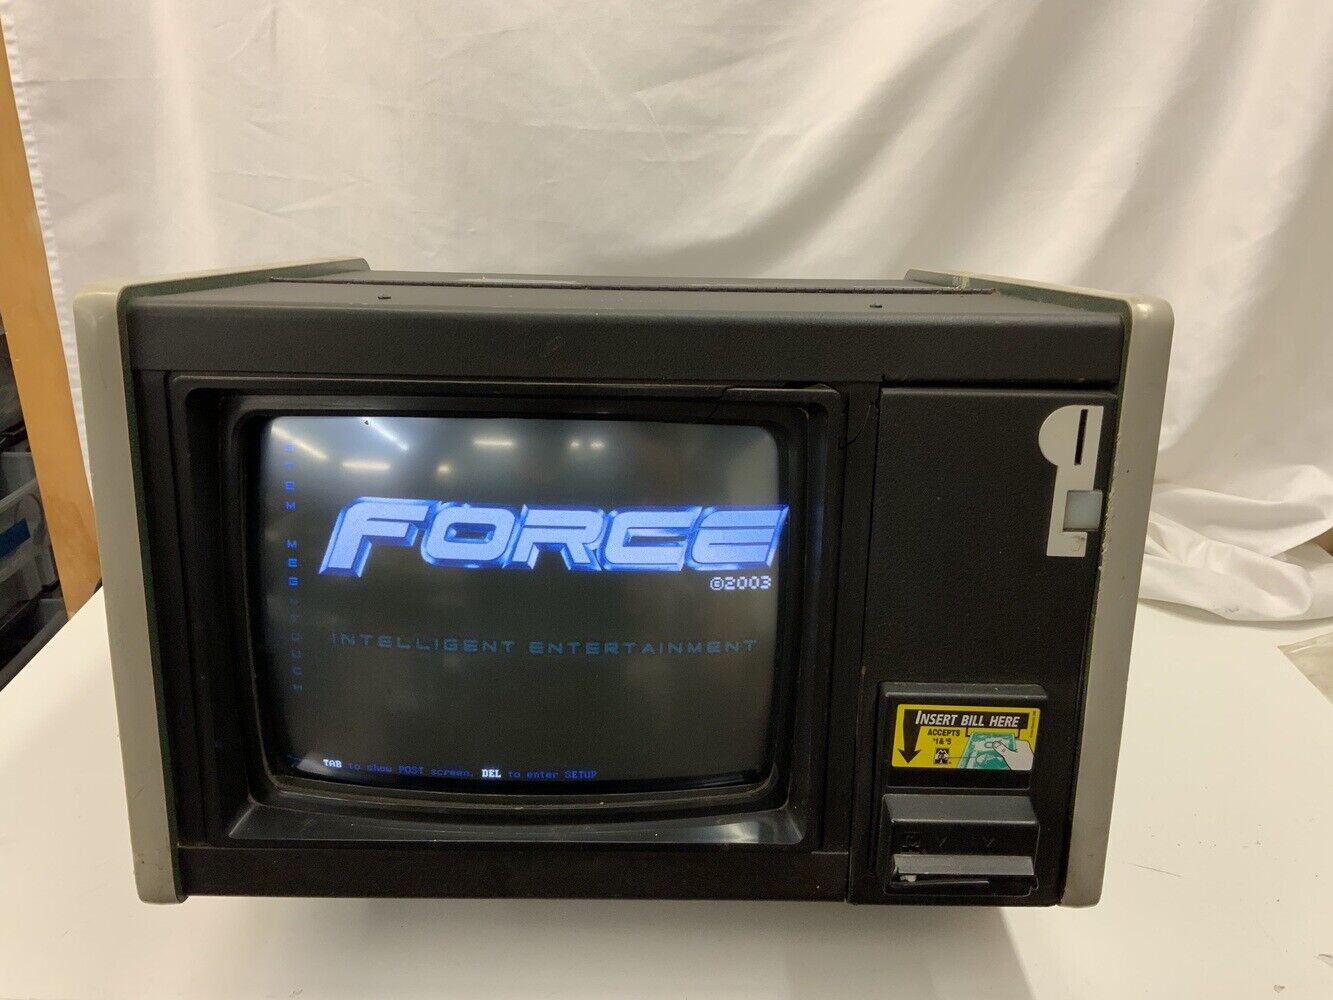 Megatouch Force Bar Game Console Circa. 2003 - Needs Fixing